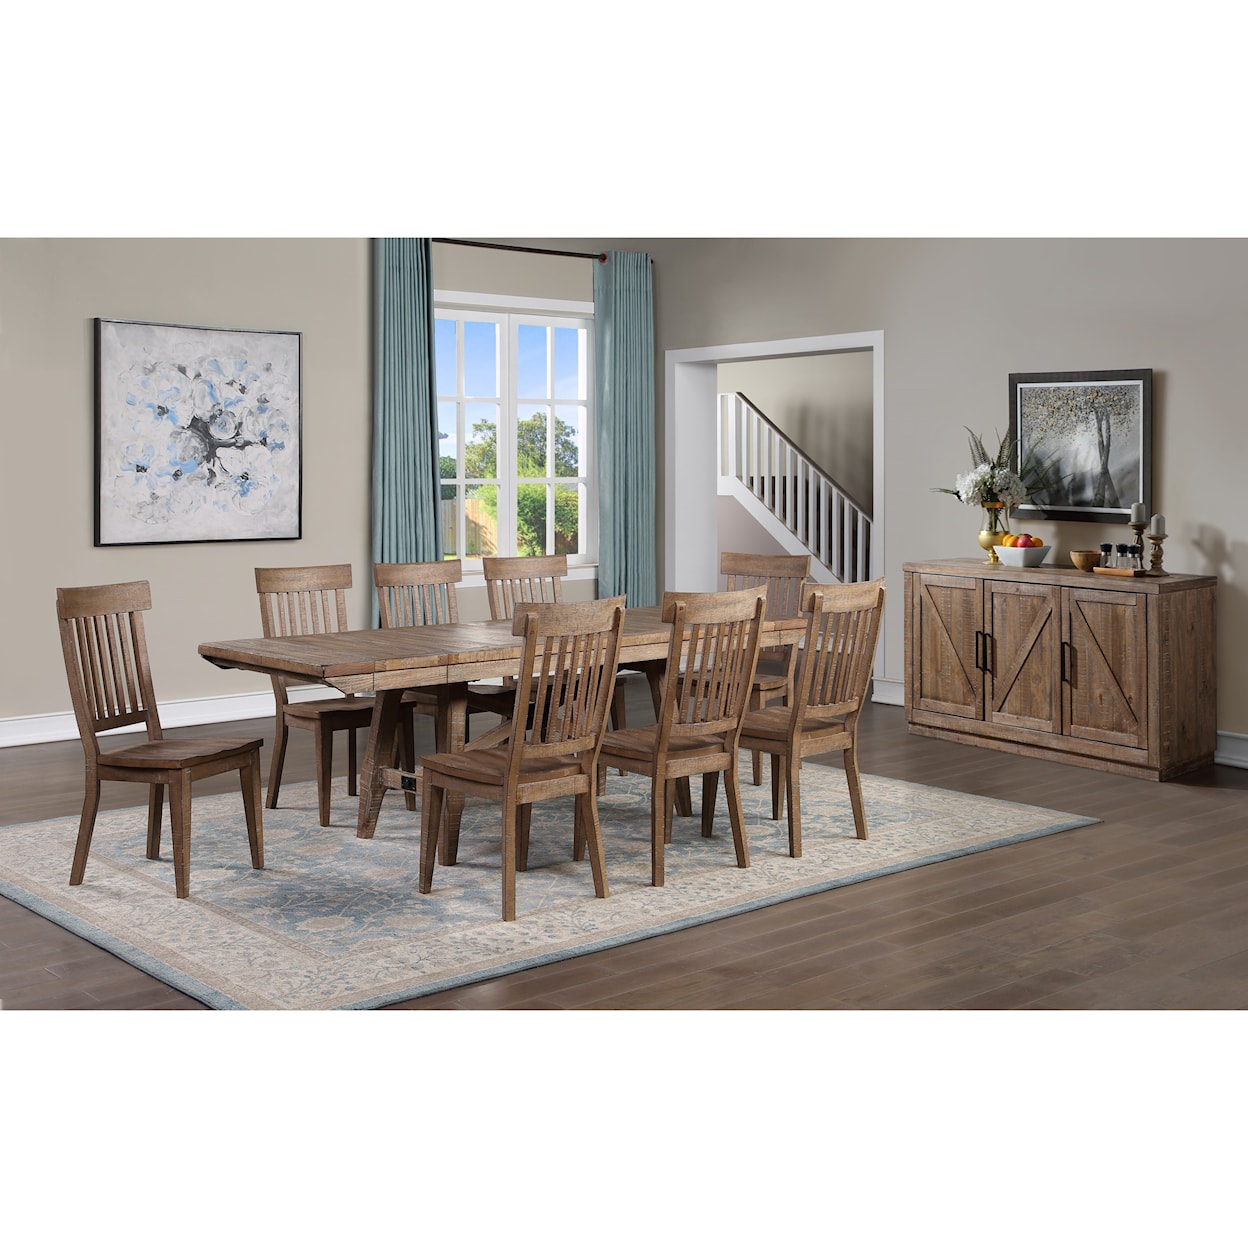 Prime Riverdale Dining Room Group